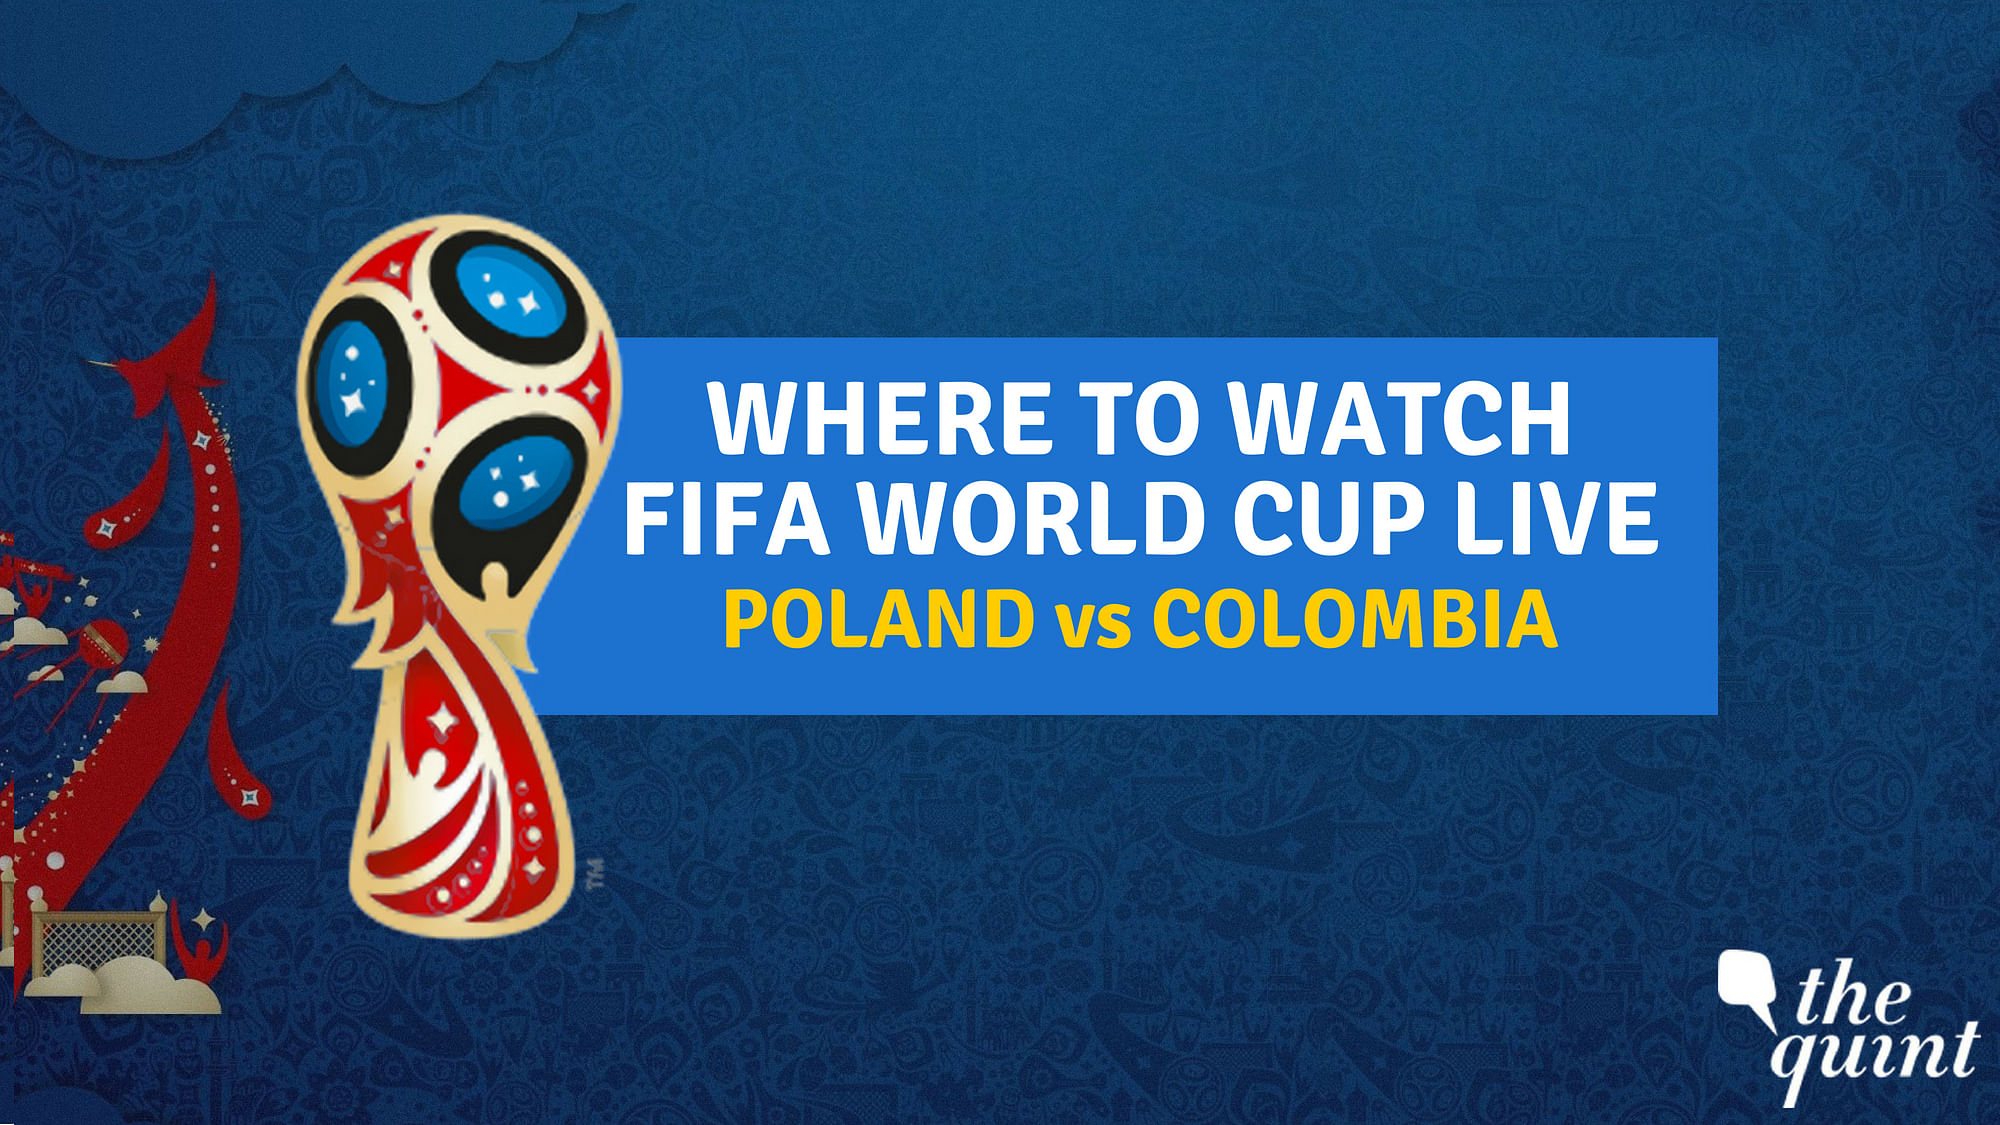 Poland vs Colombia FIFA World Cup 2018 Match will be played on 24 June.